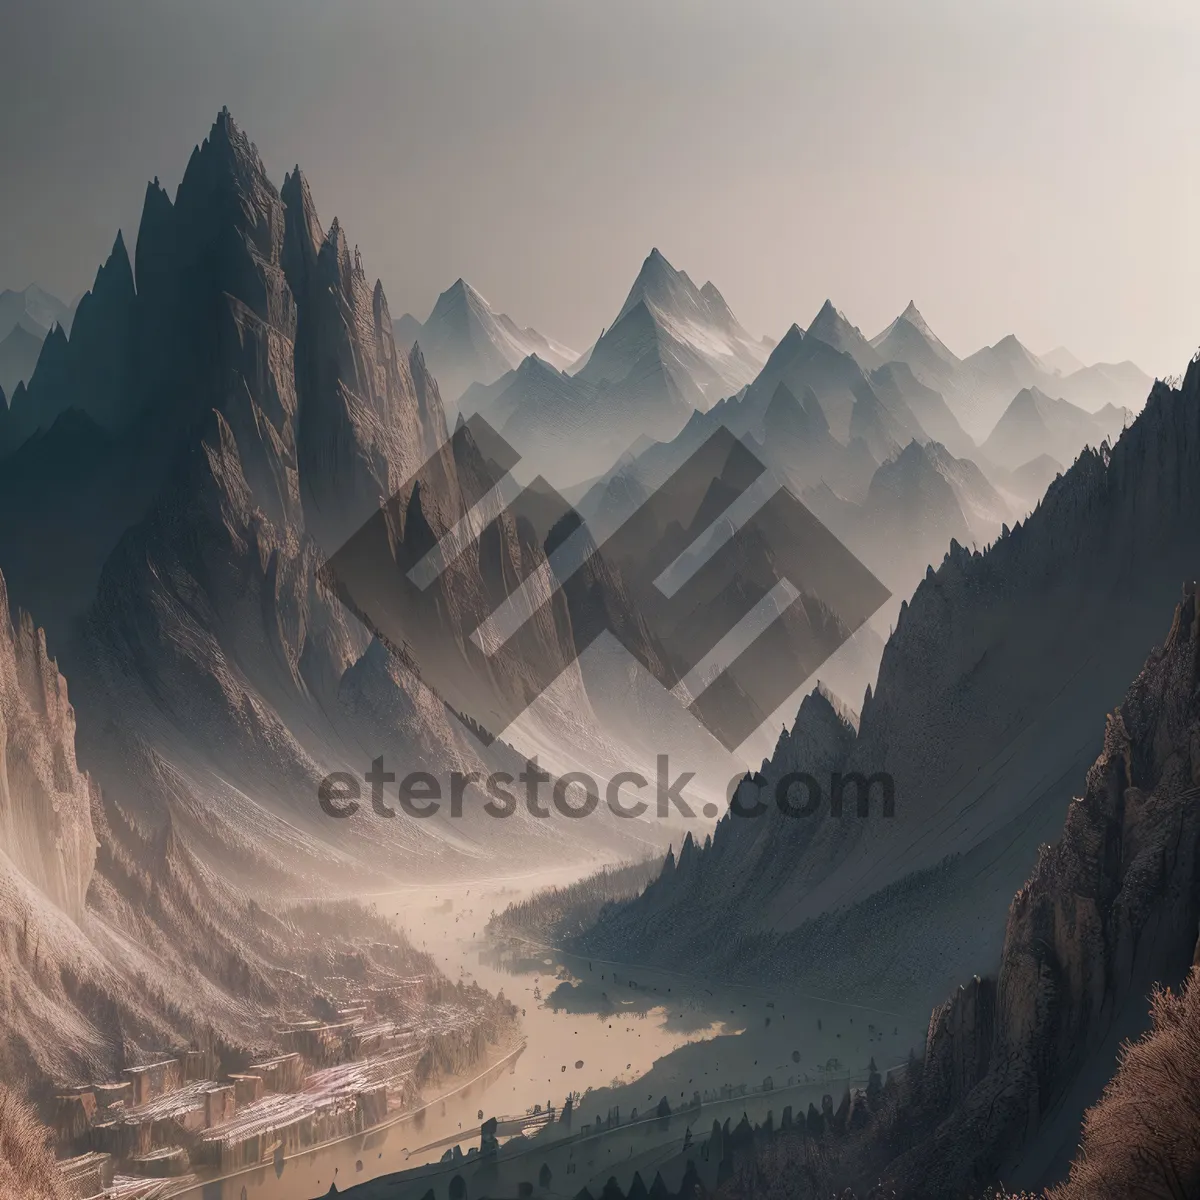 Picture of Majestic Alpine Landscape with Snowy Peaks and Glacial Valley